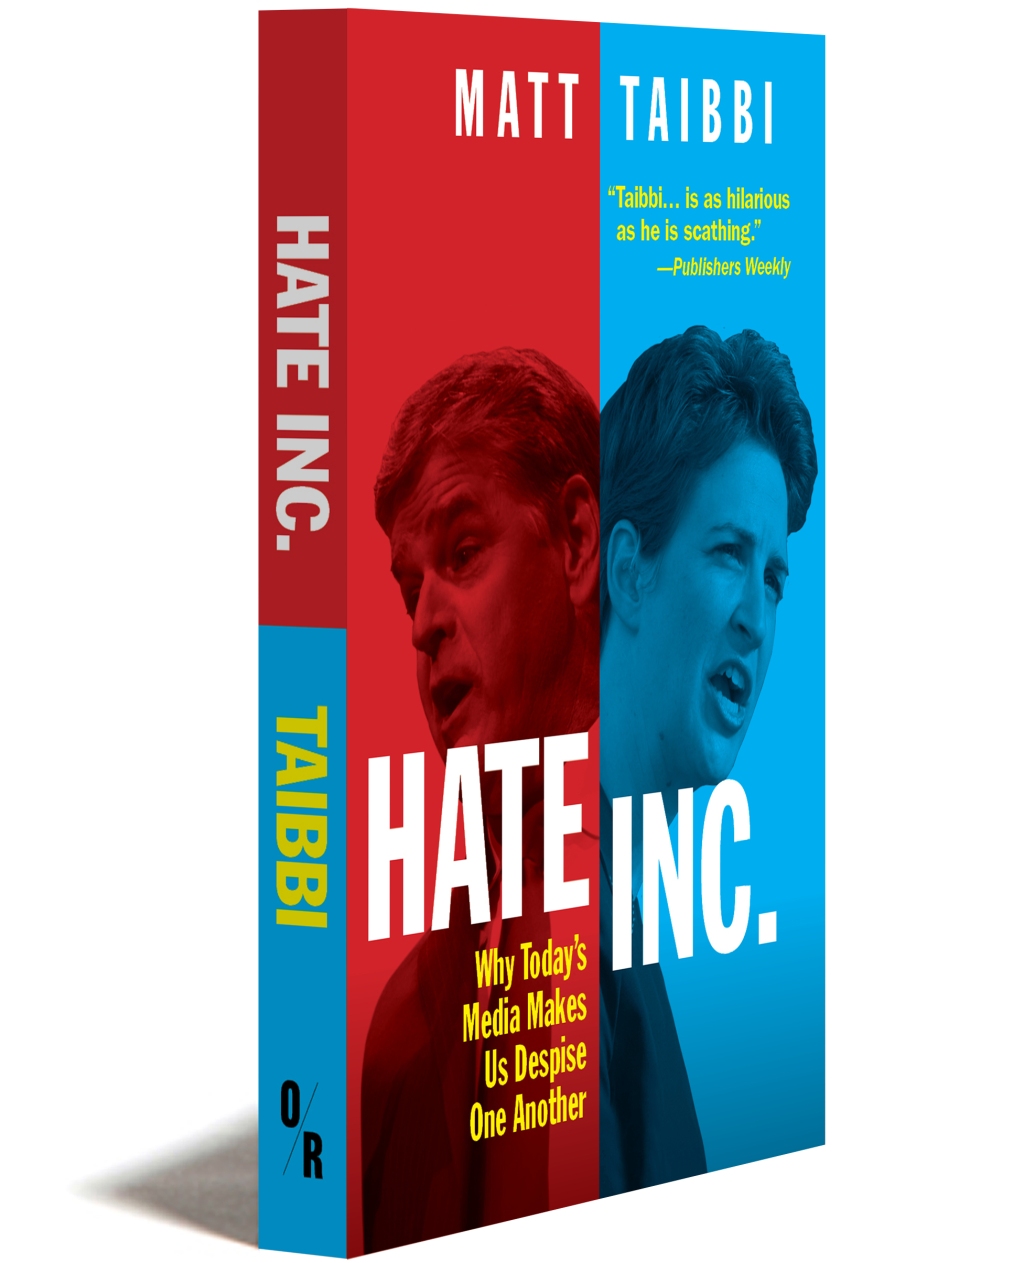 Hate Inc.: Why Today’s Media Makes us Despise One Another | A Review